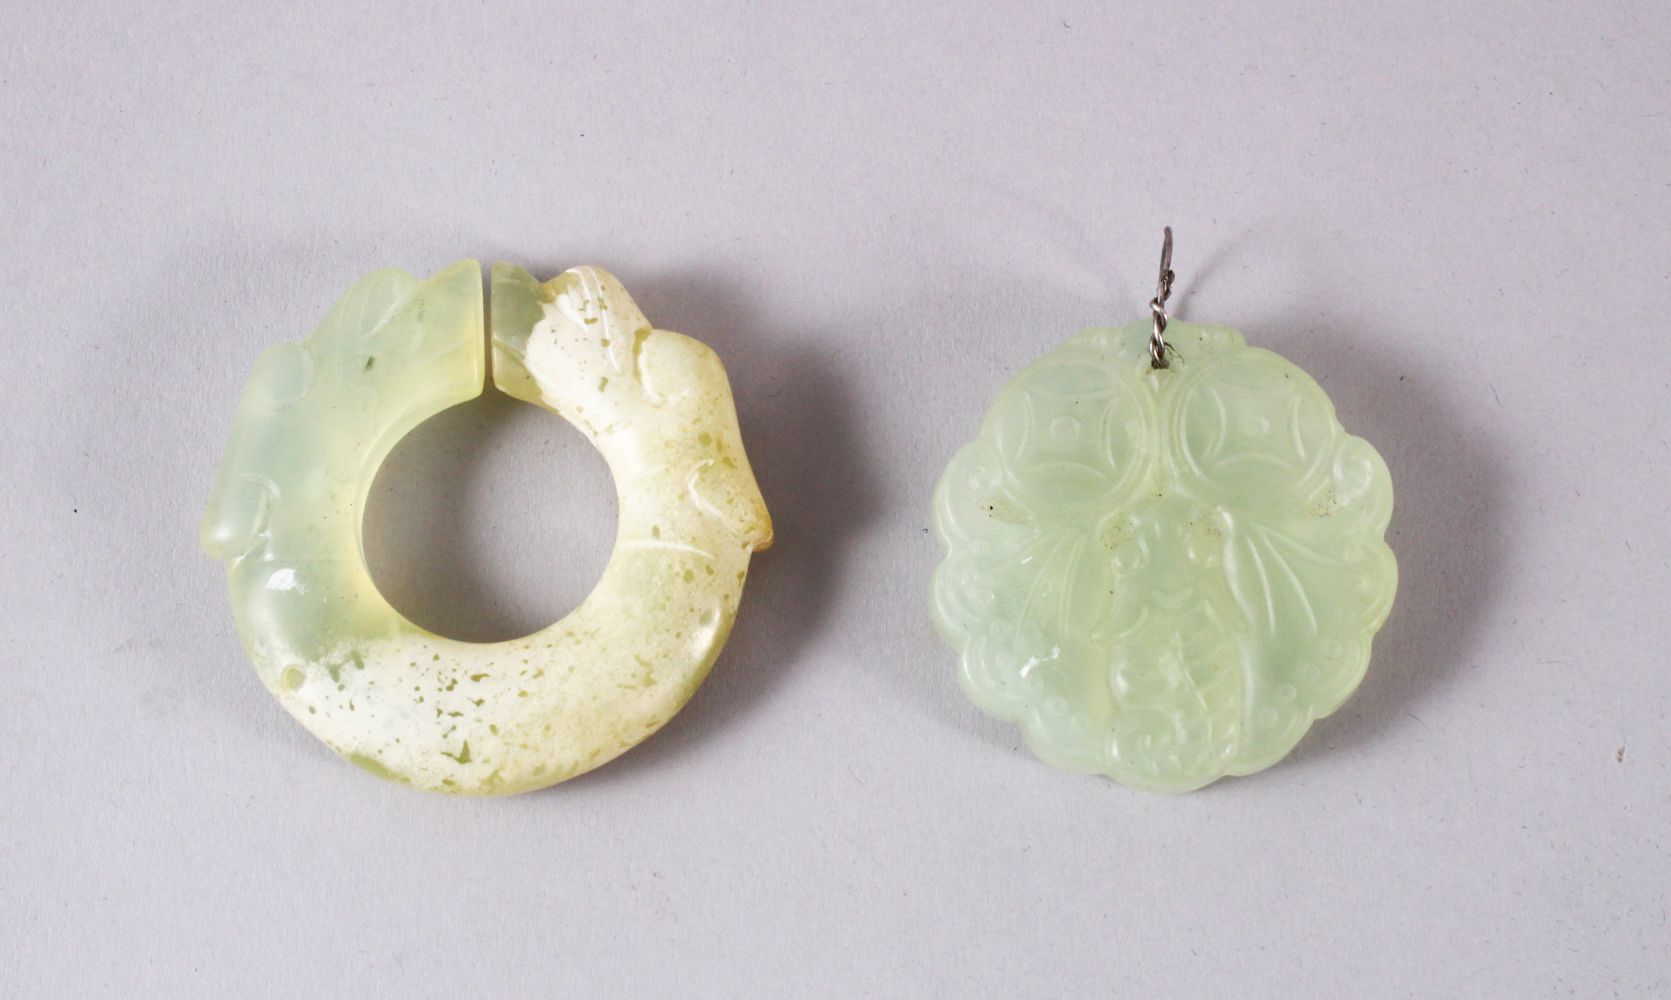 TWO CHINESE CARVED JADE BUTTERFLY & DRAGON BI DISK PENDANTS, one pale almost translucent jade carved